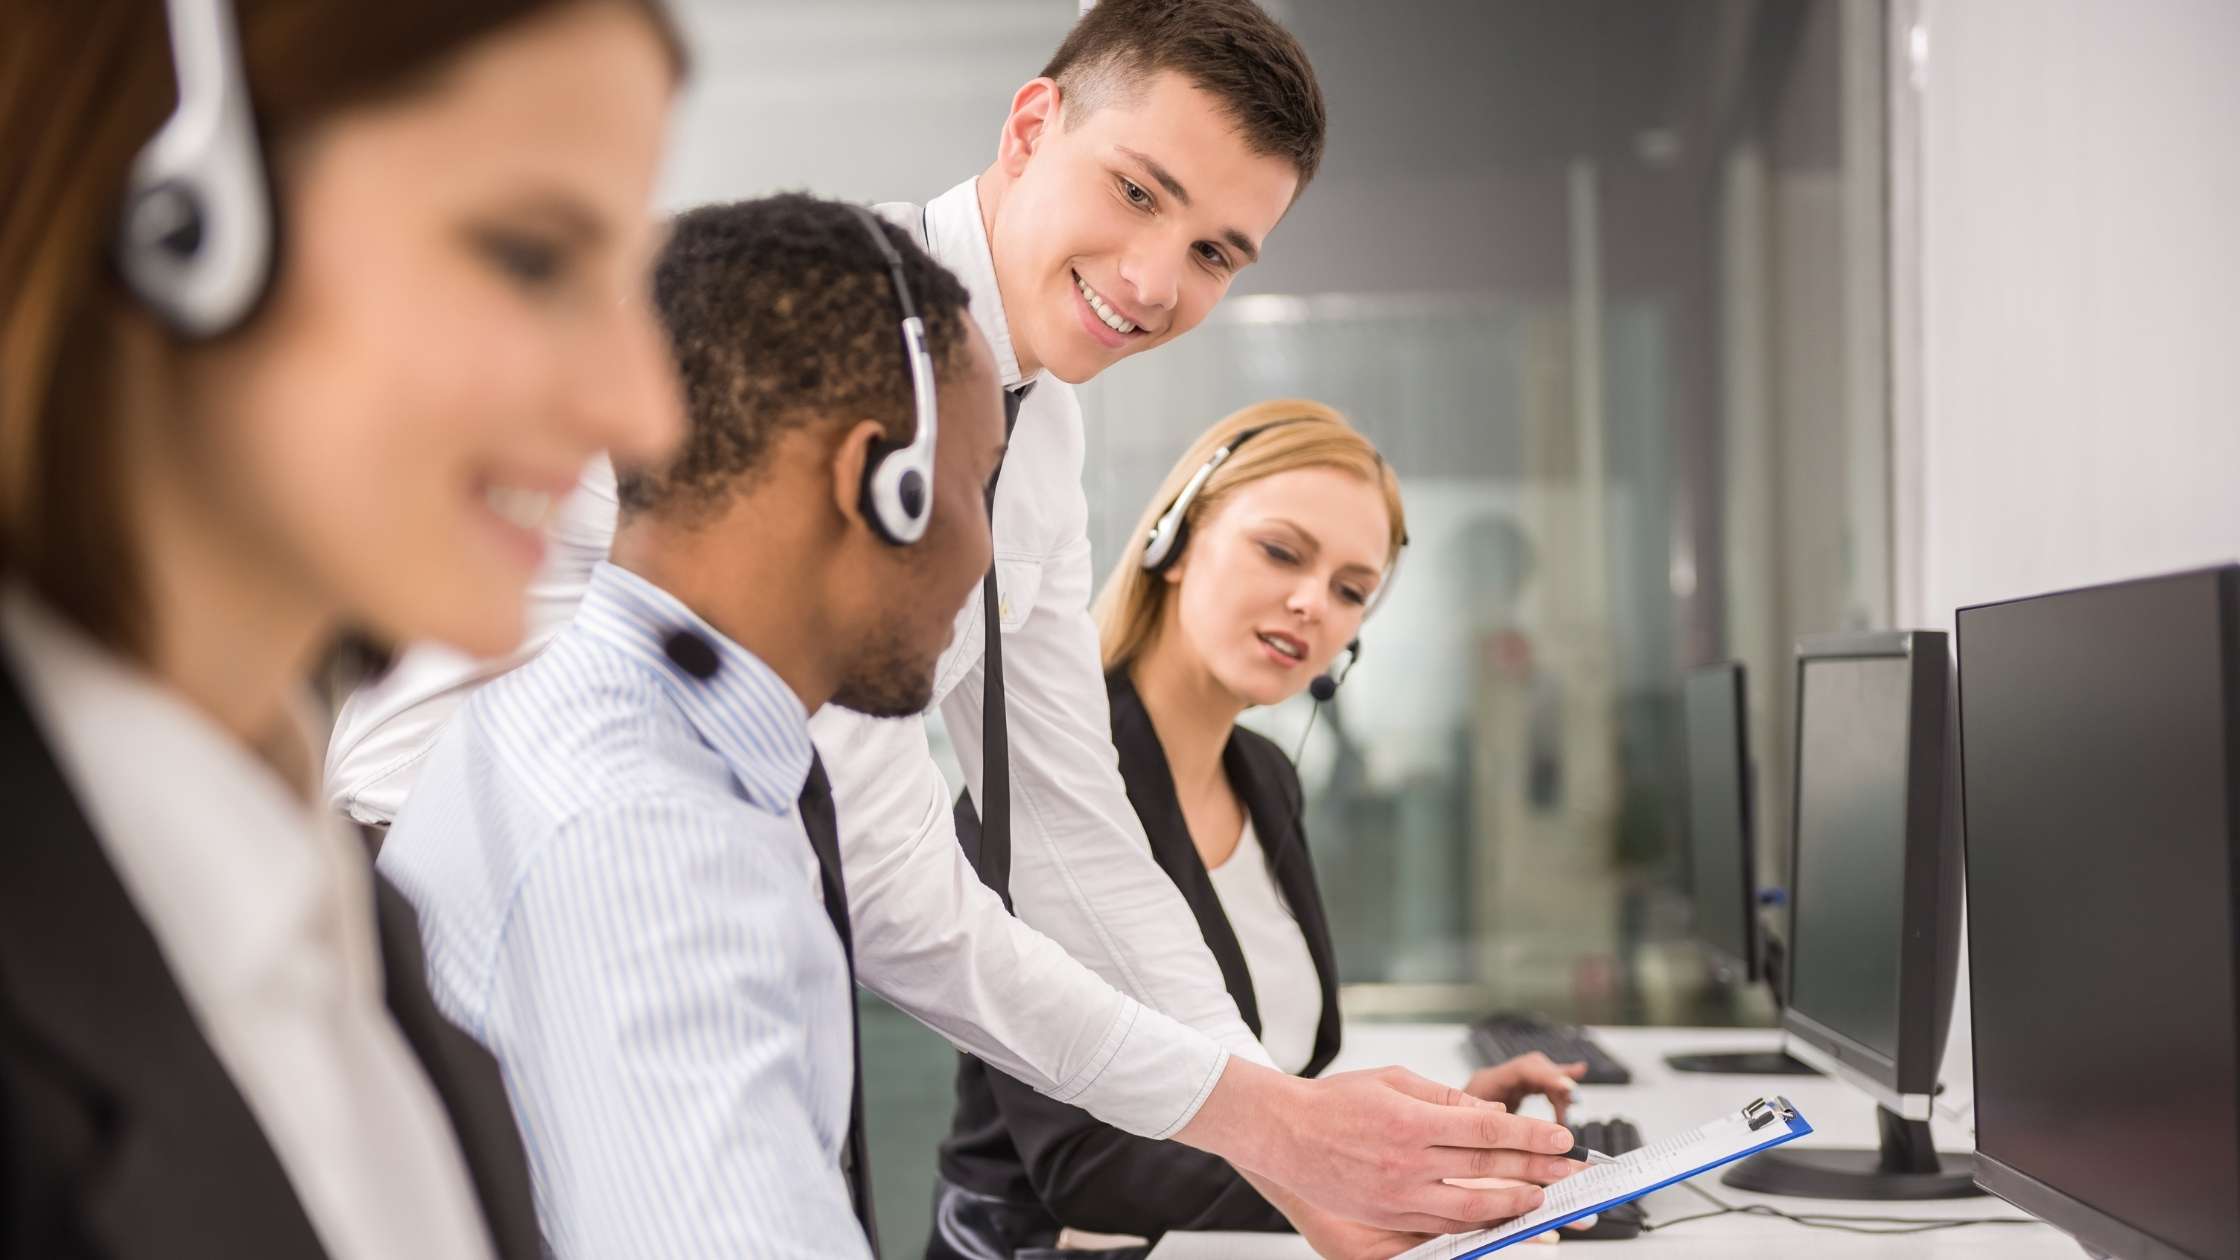 Top 5 Call Center Monitoring Software for 2022